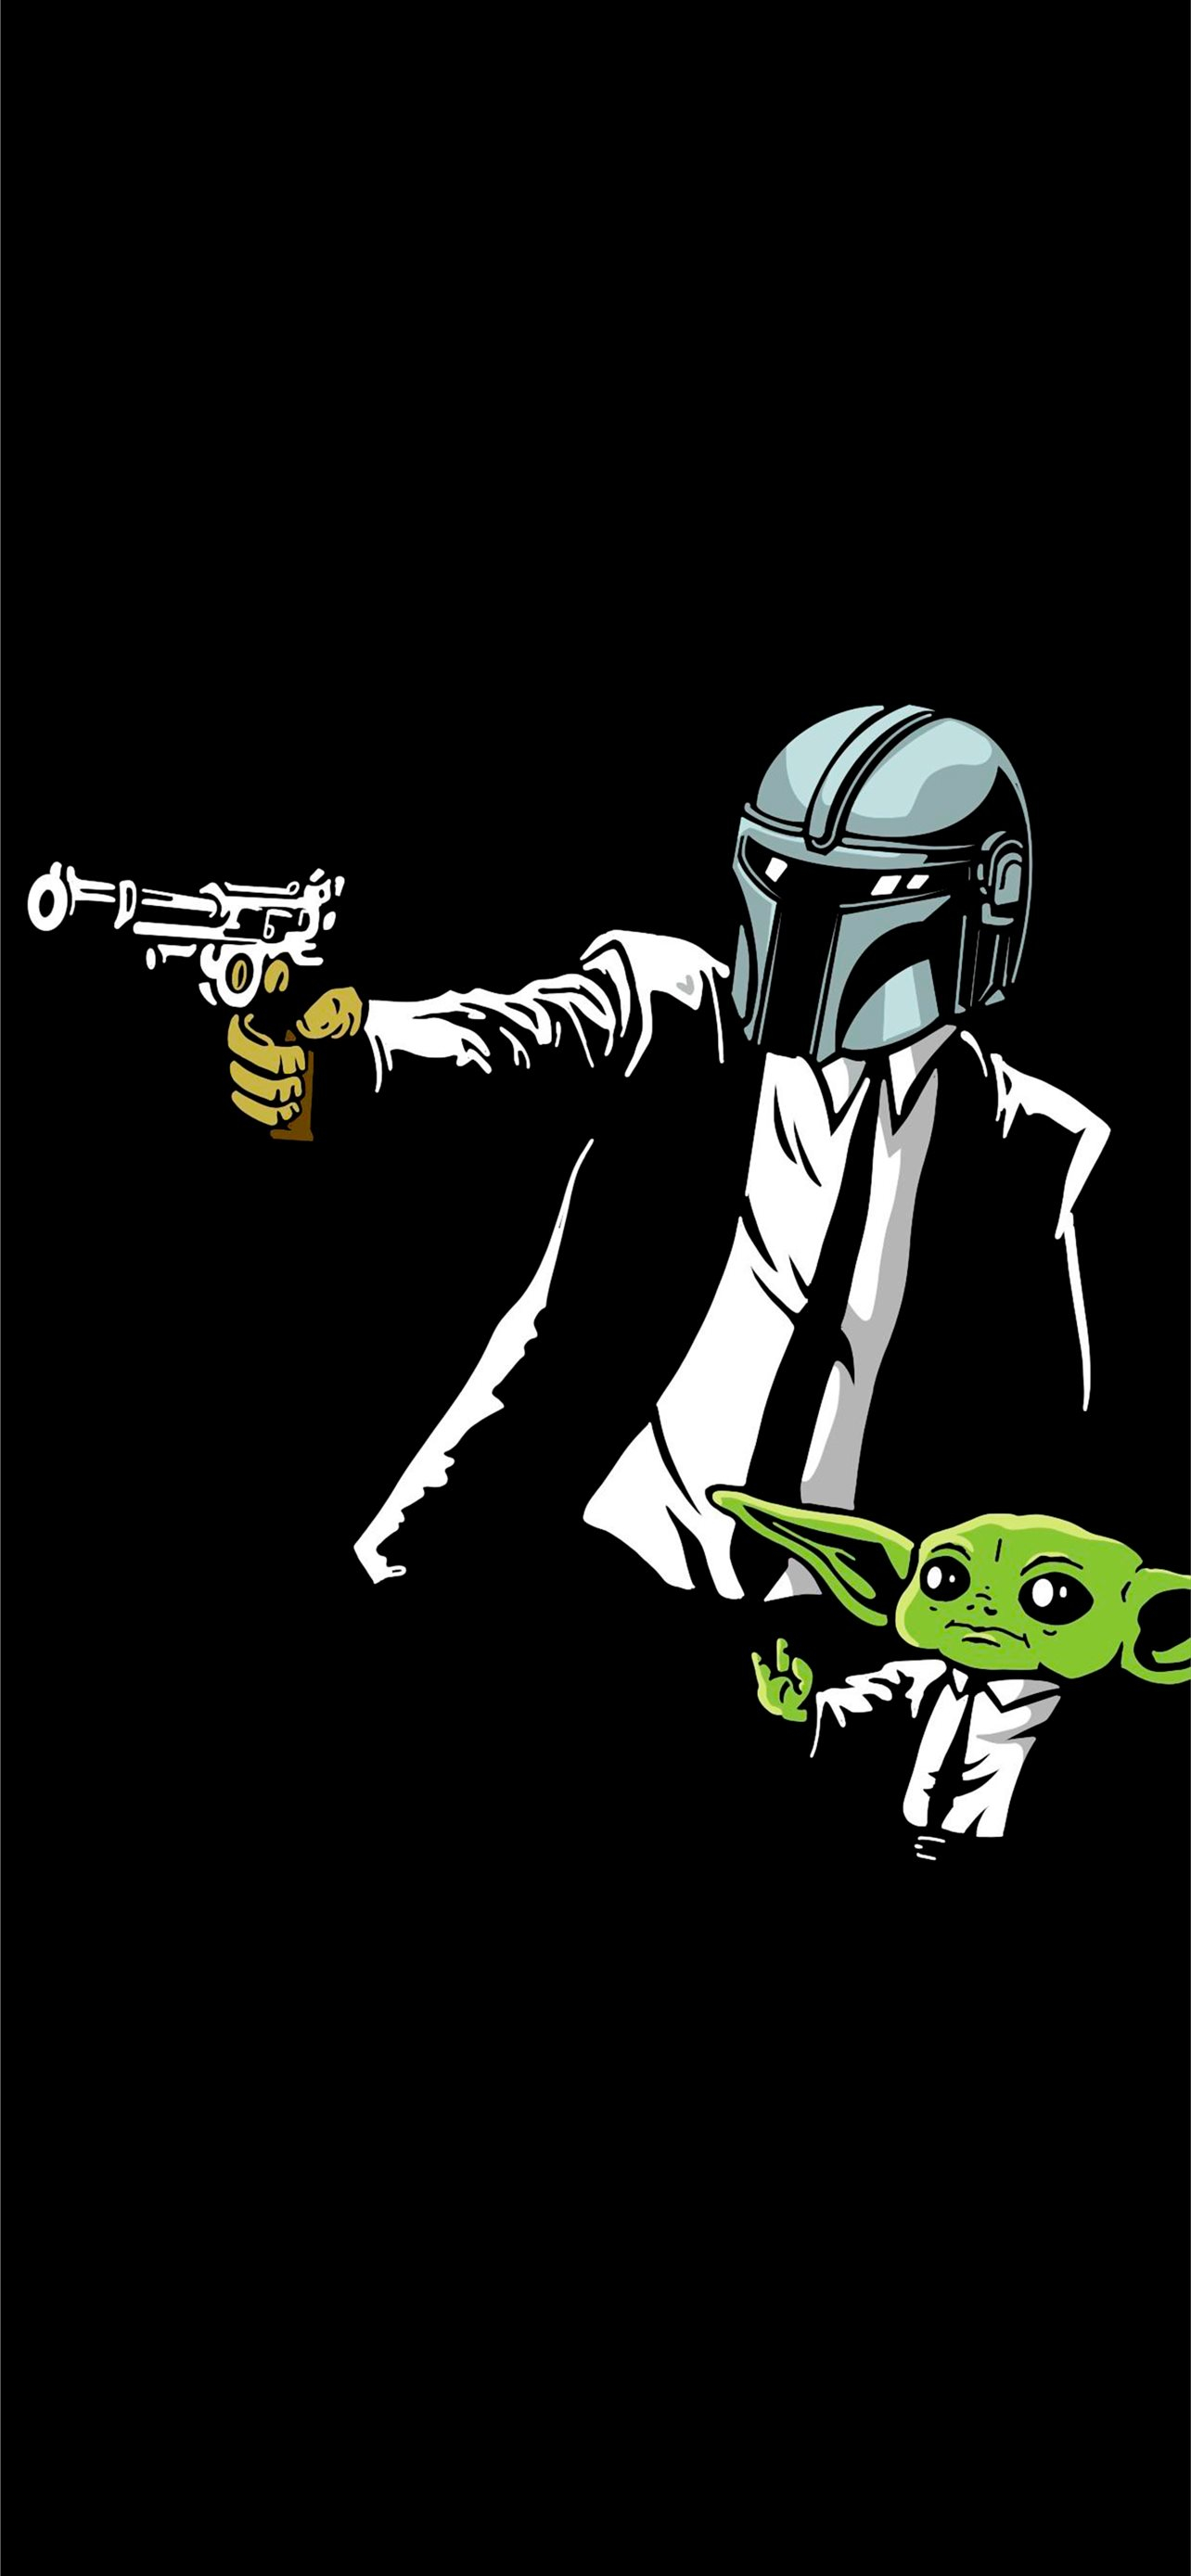 1284x2778 Pulp Fiction Mandalorian Style Amoledbackgrounds iPhone Wallpapers Free Download